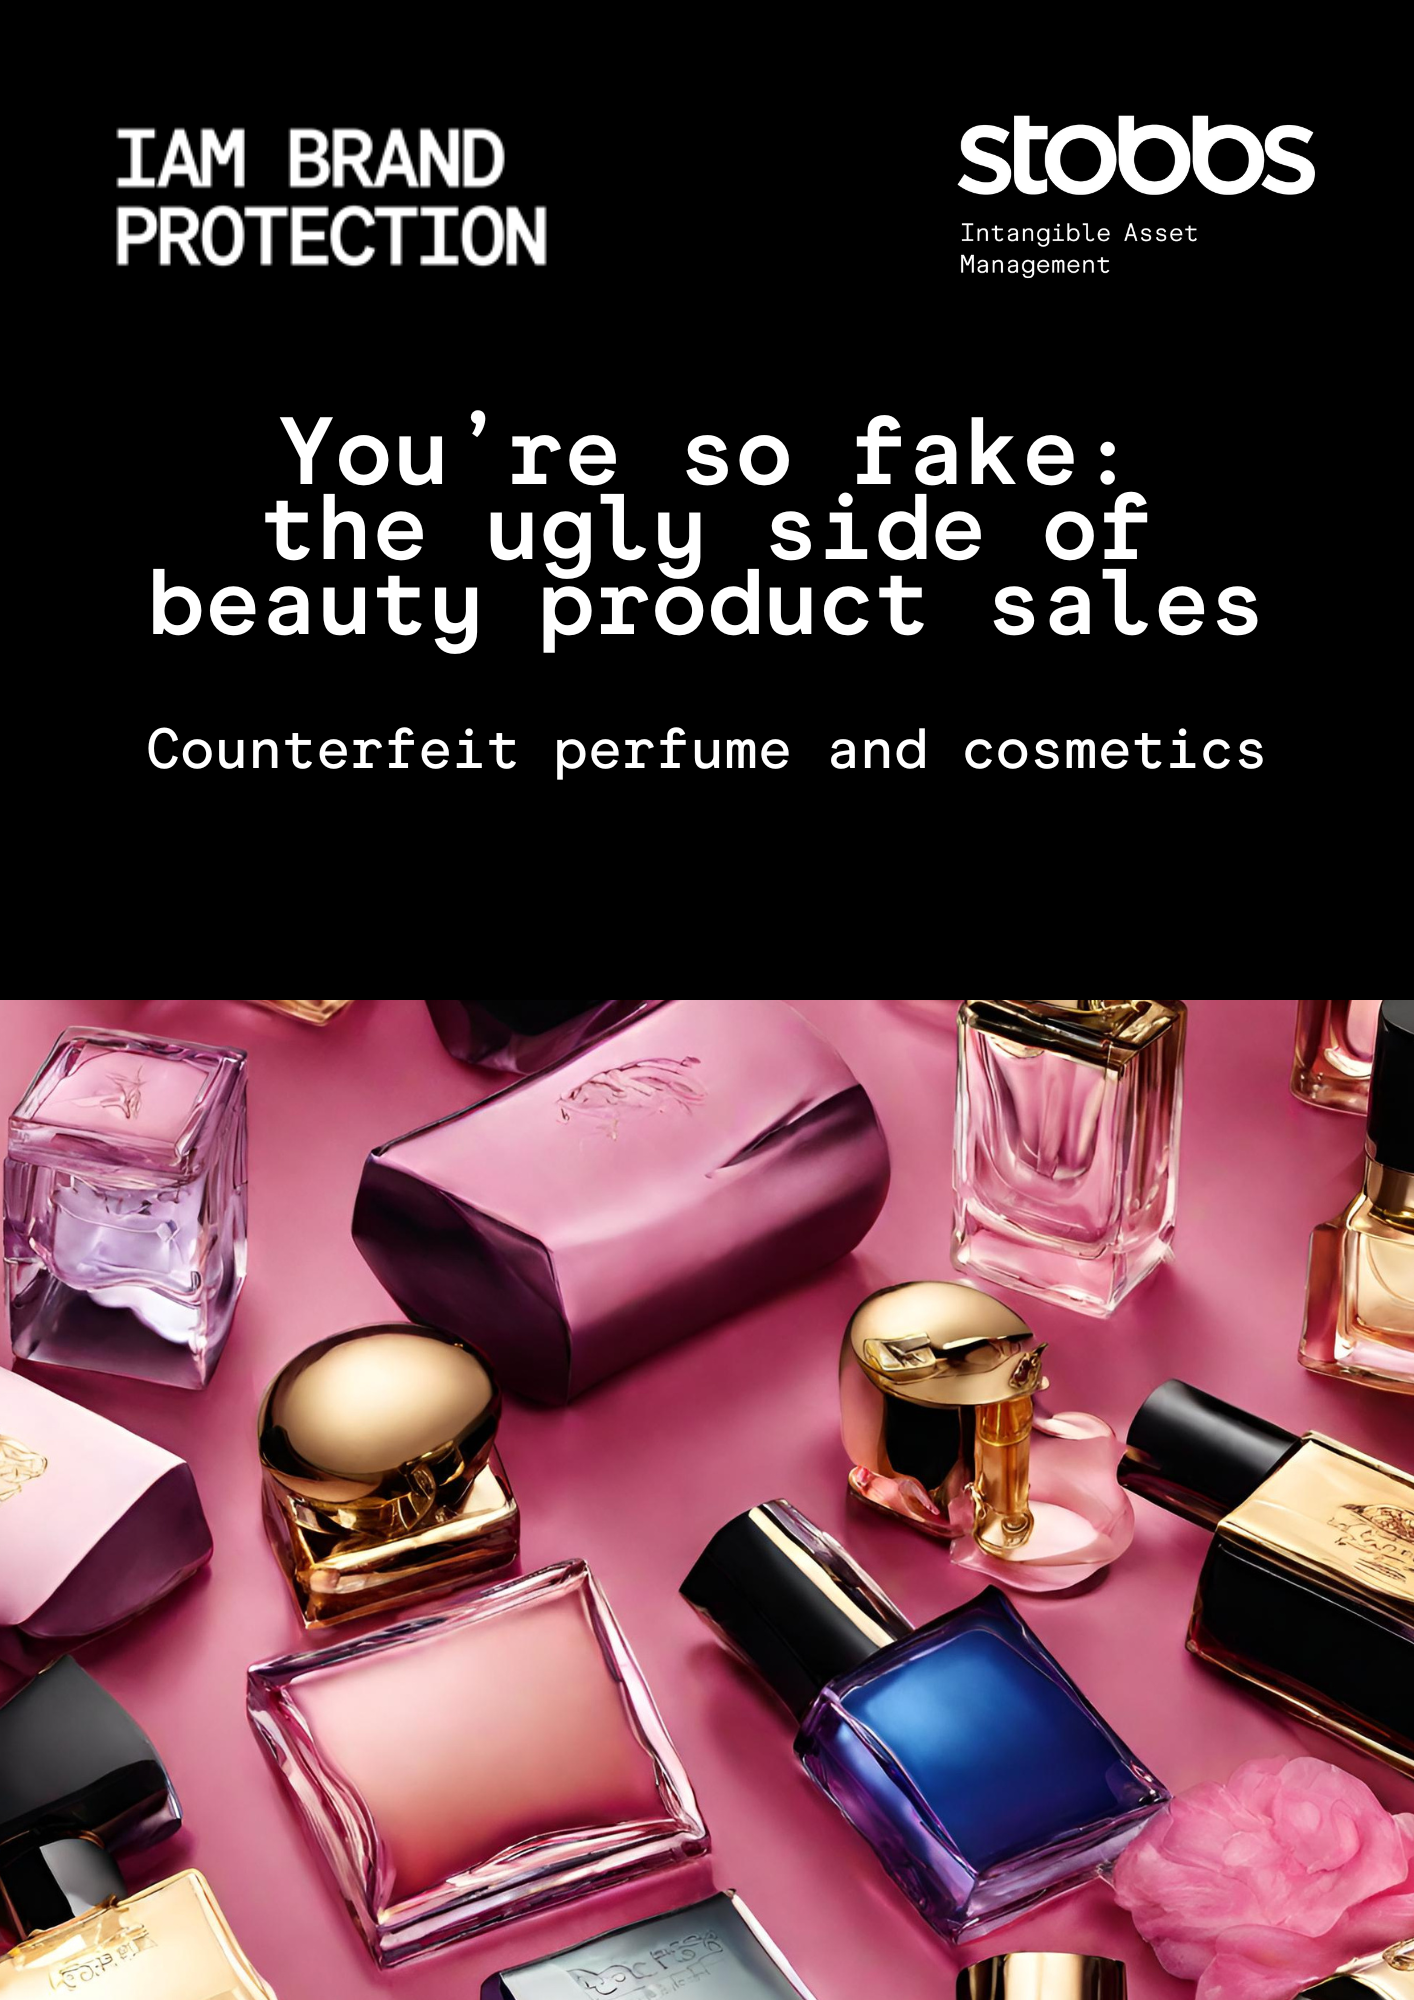 8. Beauty counterfeits